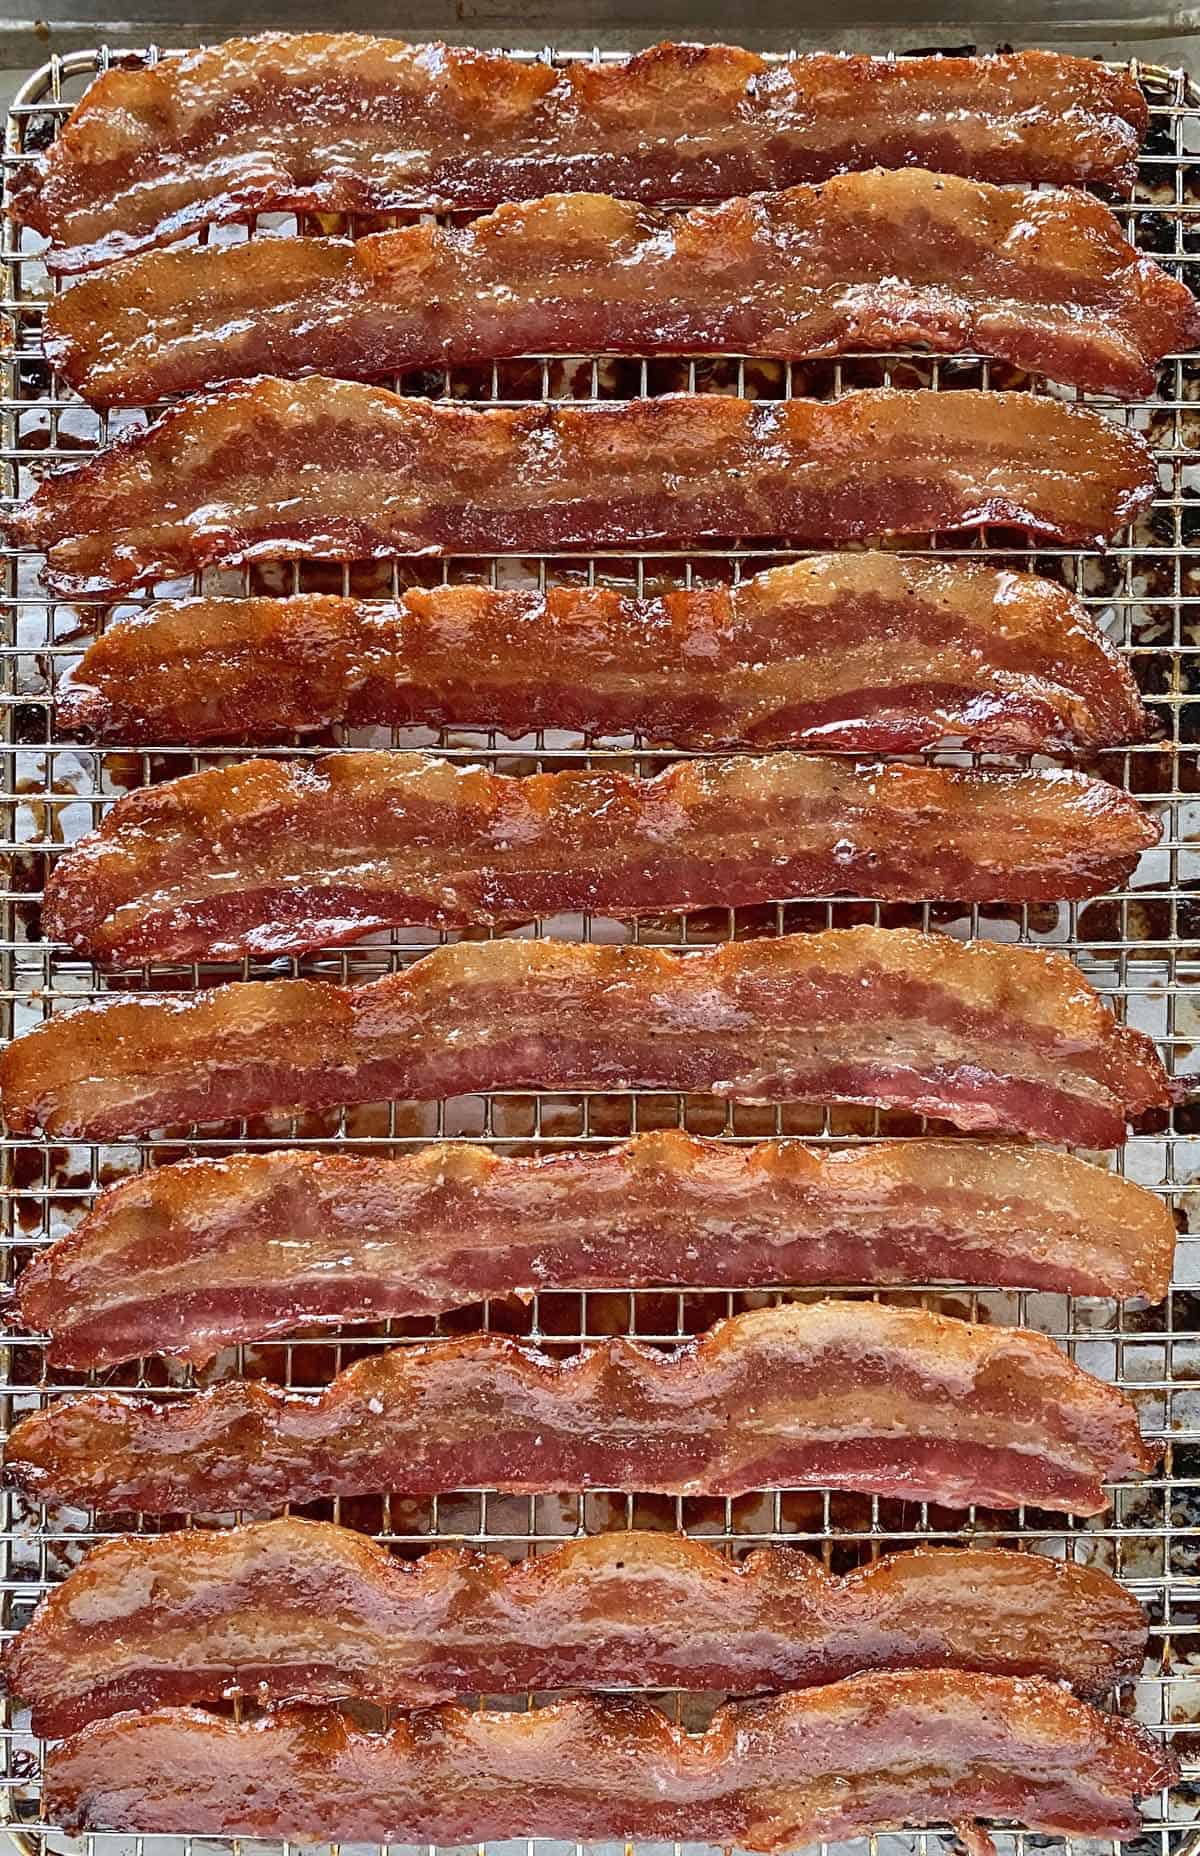 A pan of golden brown, glazed million dollar bacon just out of the oven.